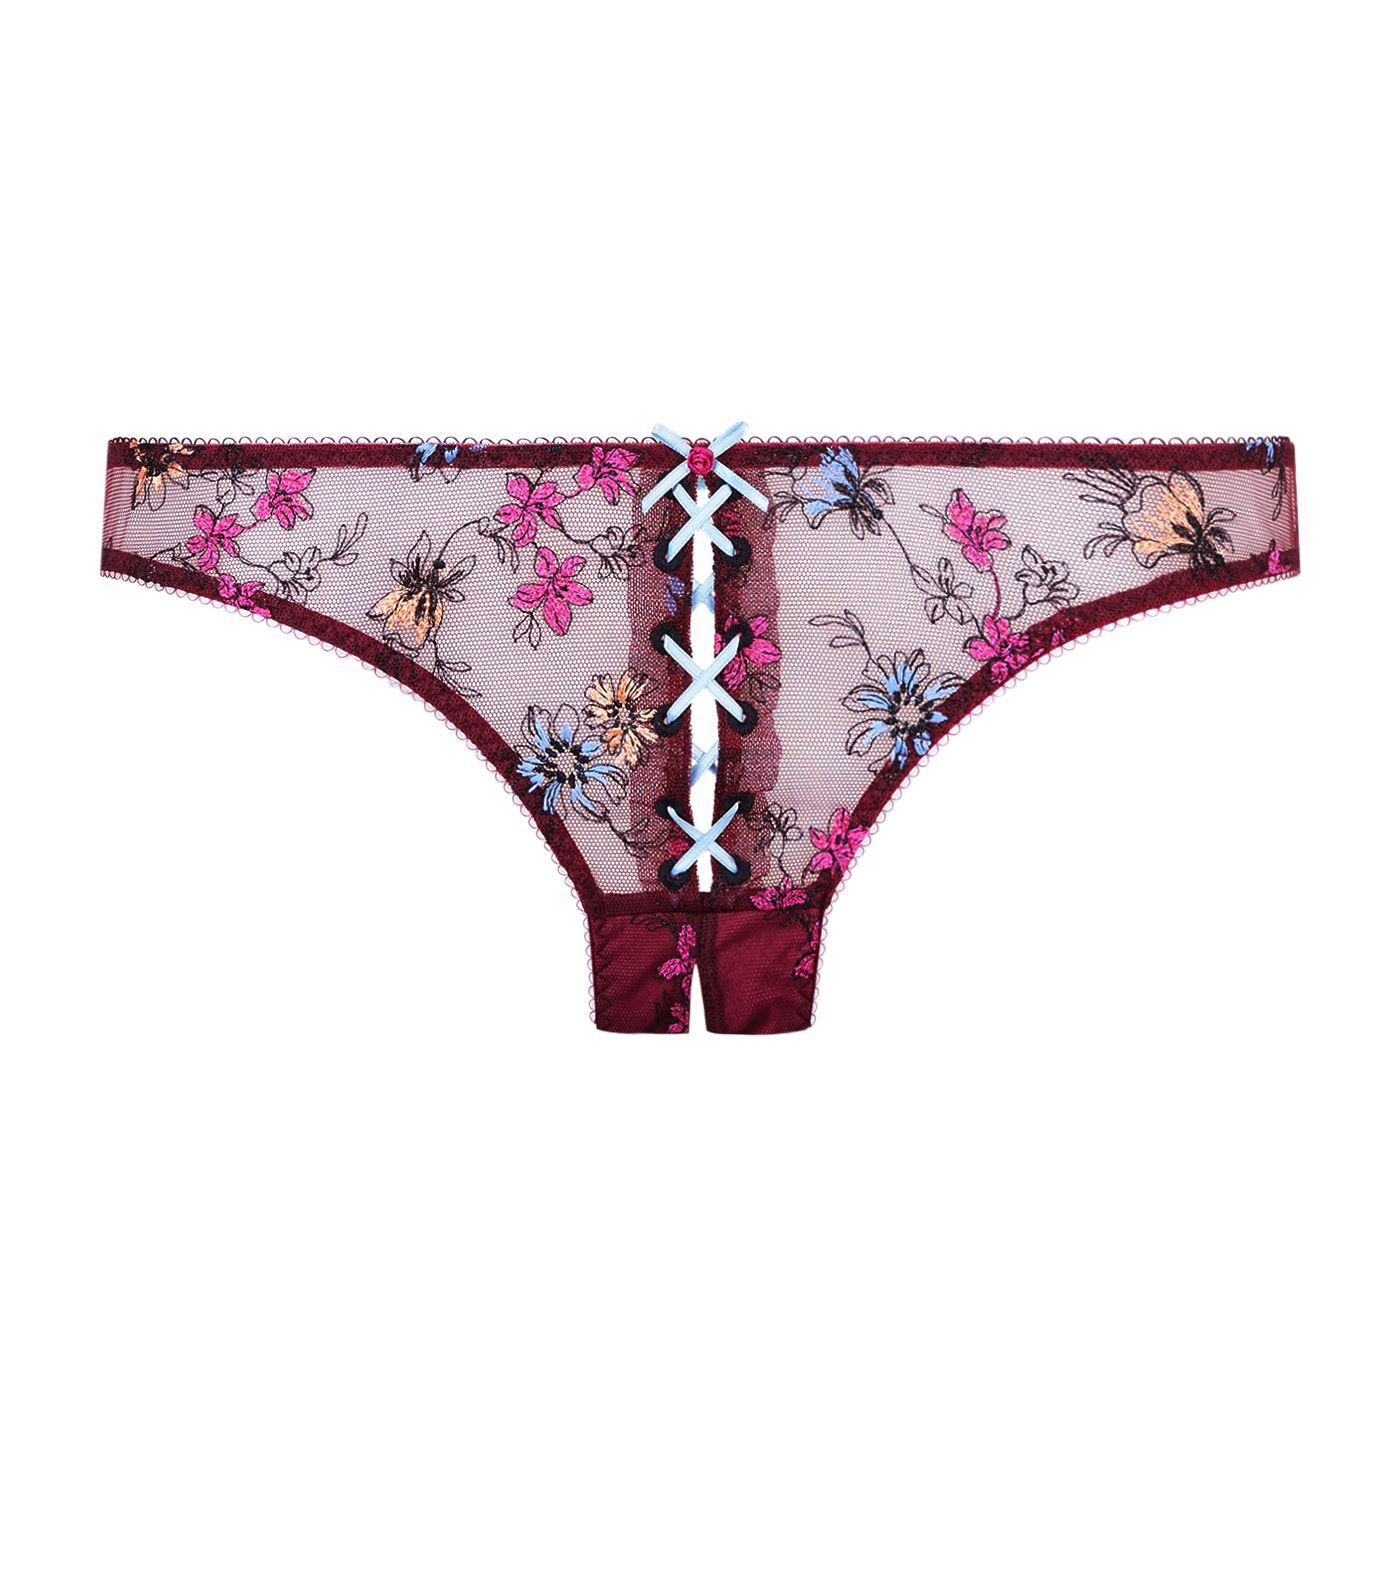 Agent Provocateur Synthetic Bluebelle Ouvert Briefs in Purple - Lyst